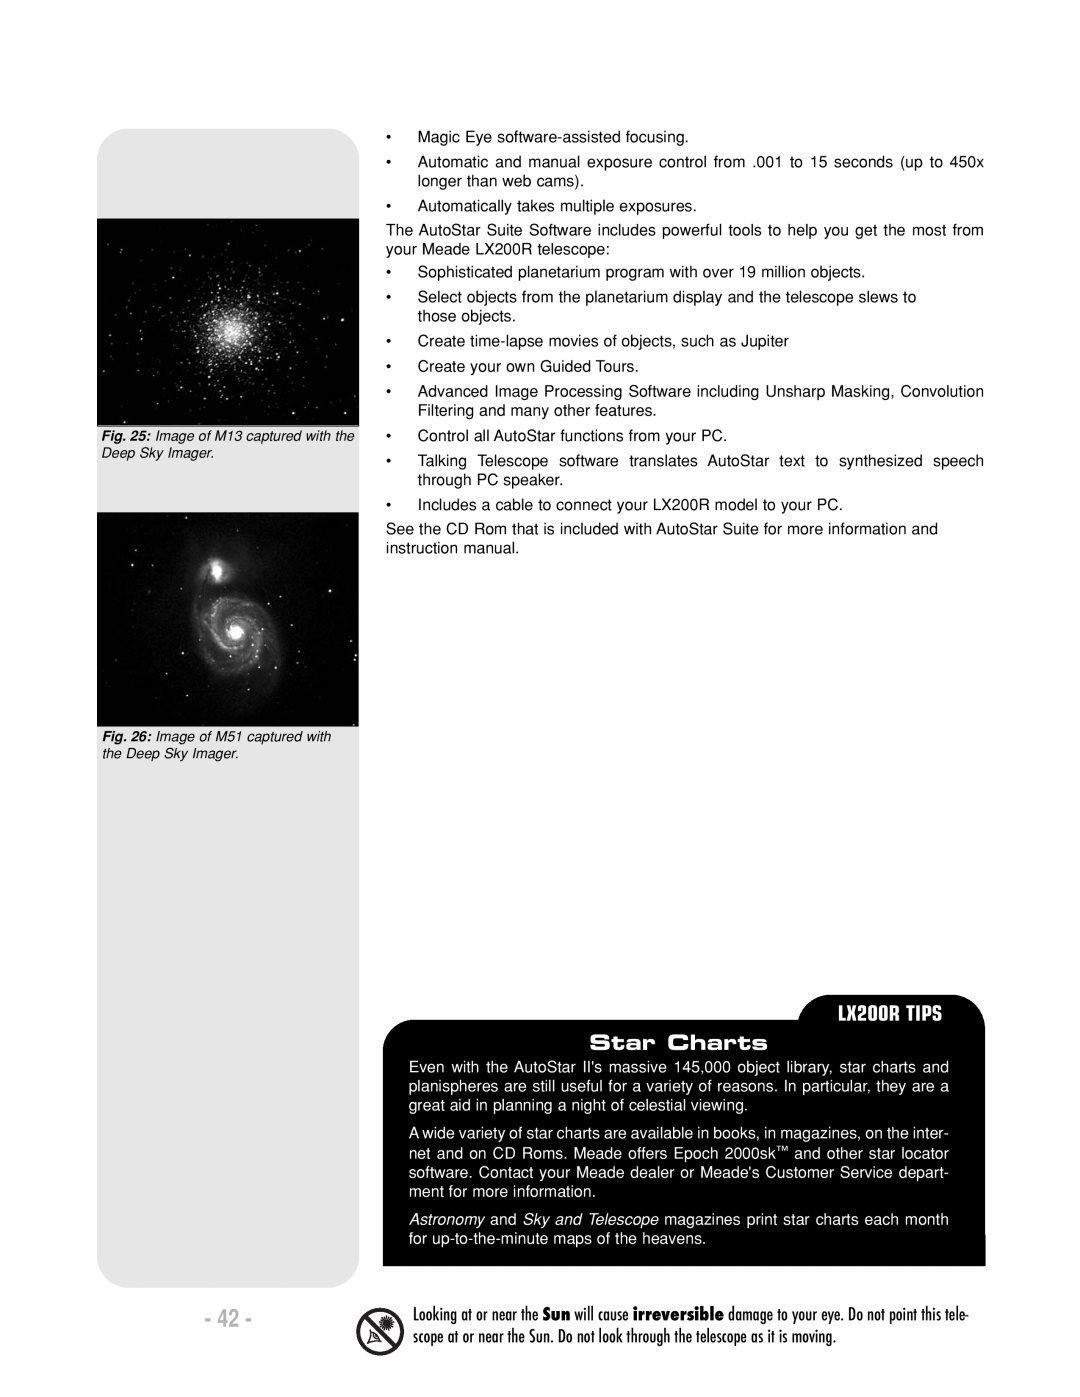 Meade LX200 R instruction manual LX200R TIPS Star Charts 